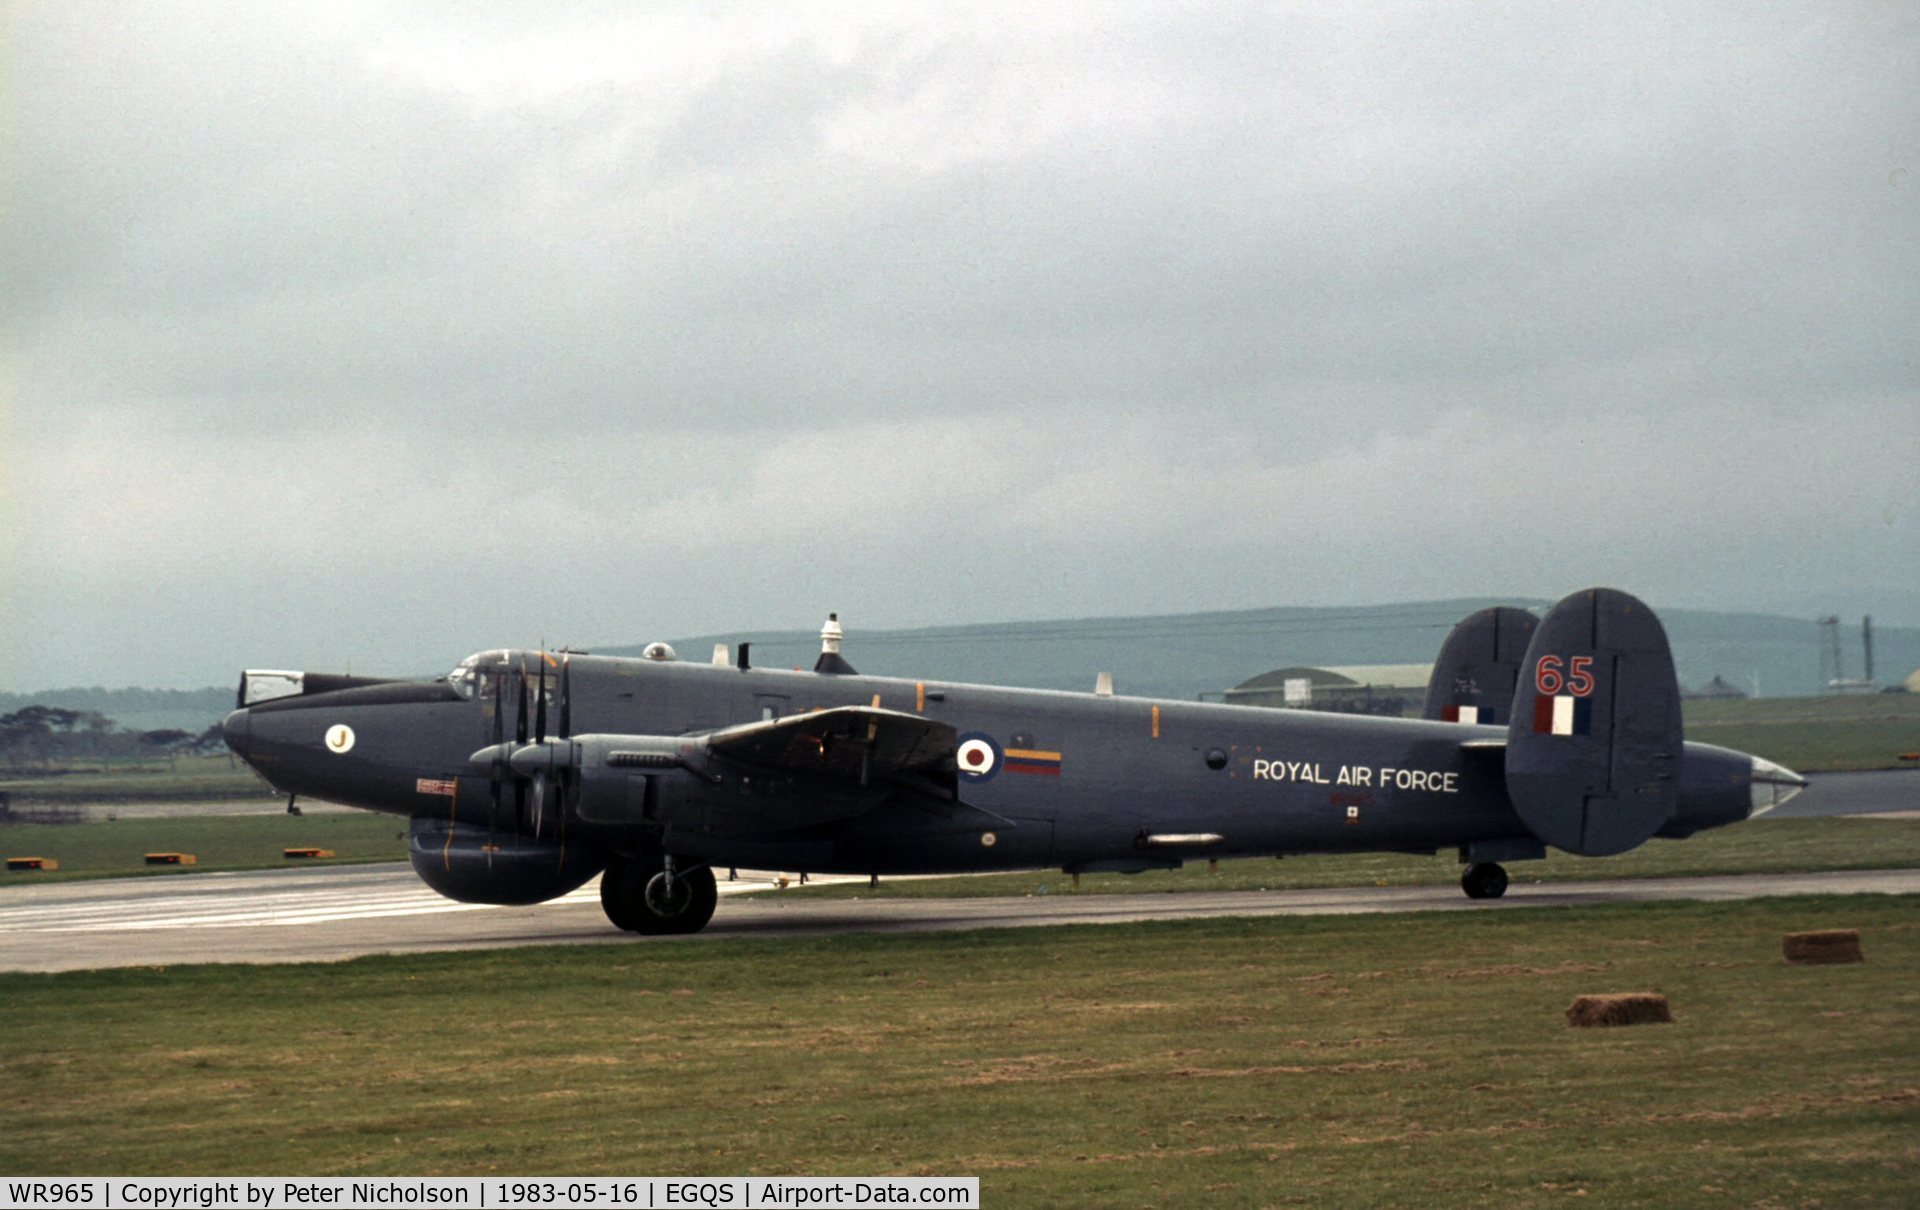 WR965, 1954 Avro 716 Shackleton AEW.2 C/N Not found WR965, Shackleton AEW.2 of 8 Squadron joining the active runway at RAF Lossiemouth in May 1983.